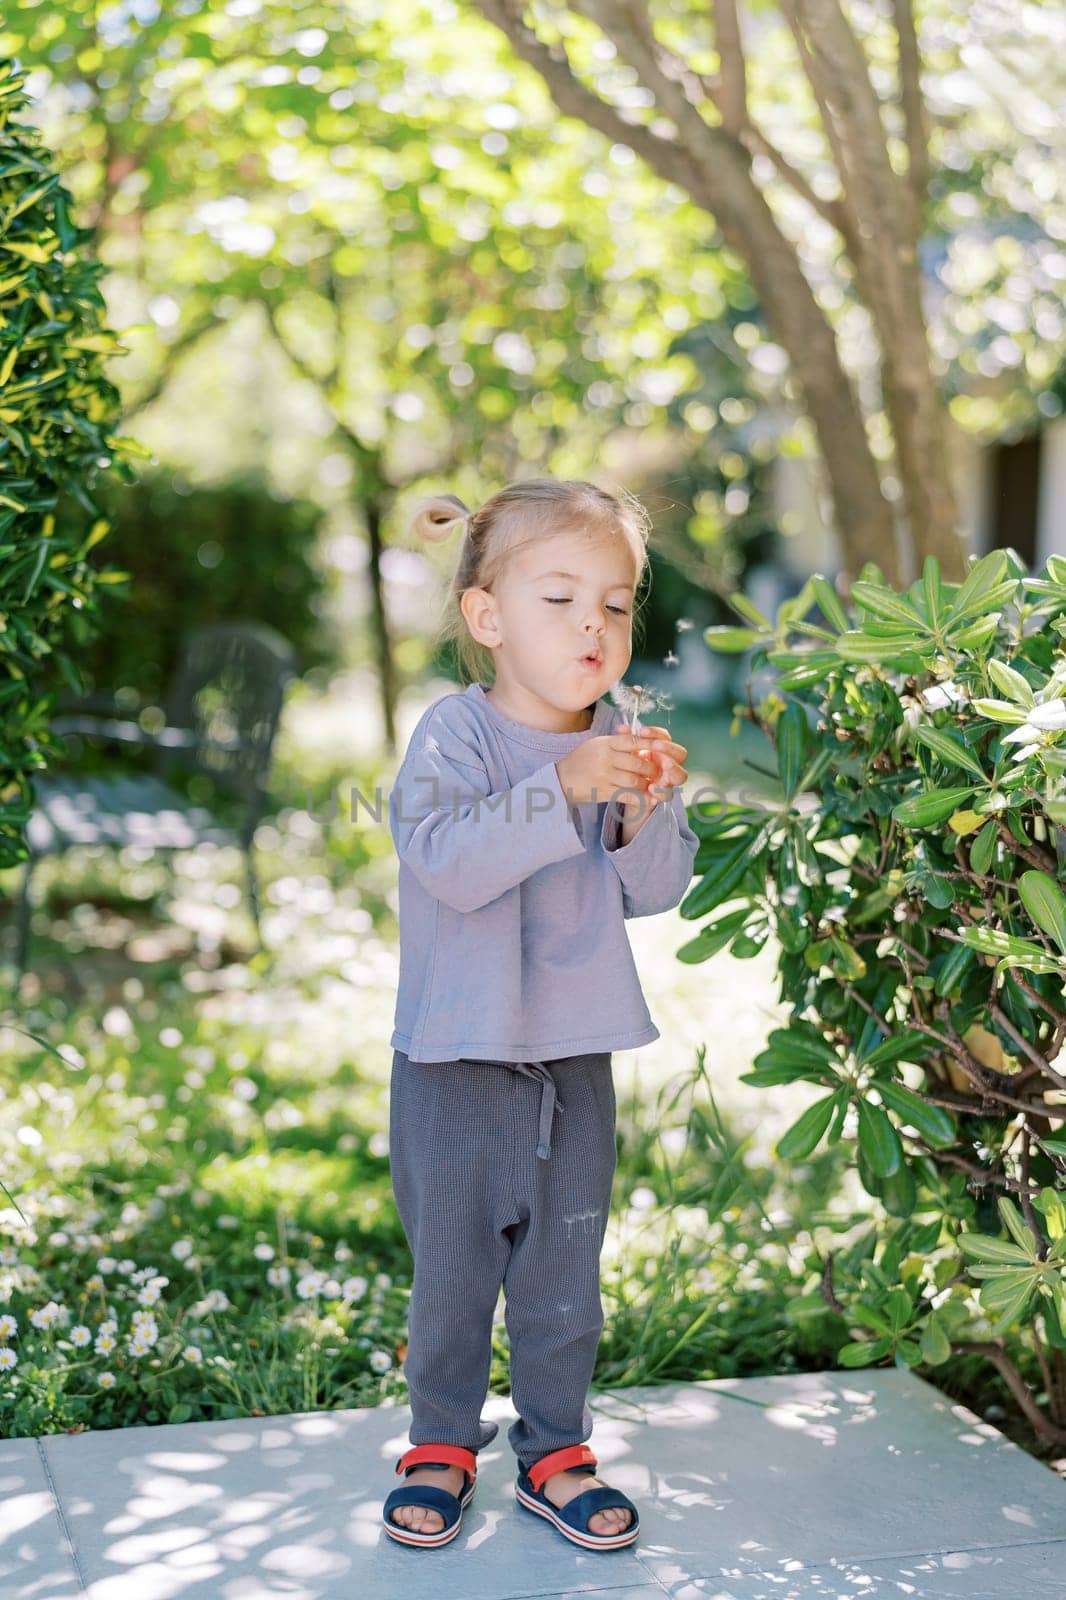 Little girl blowing on a dandelion in her hand while standing in a sunny garden. High quality photo